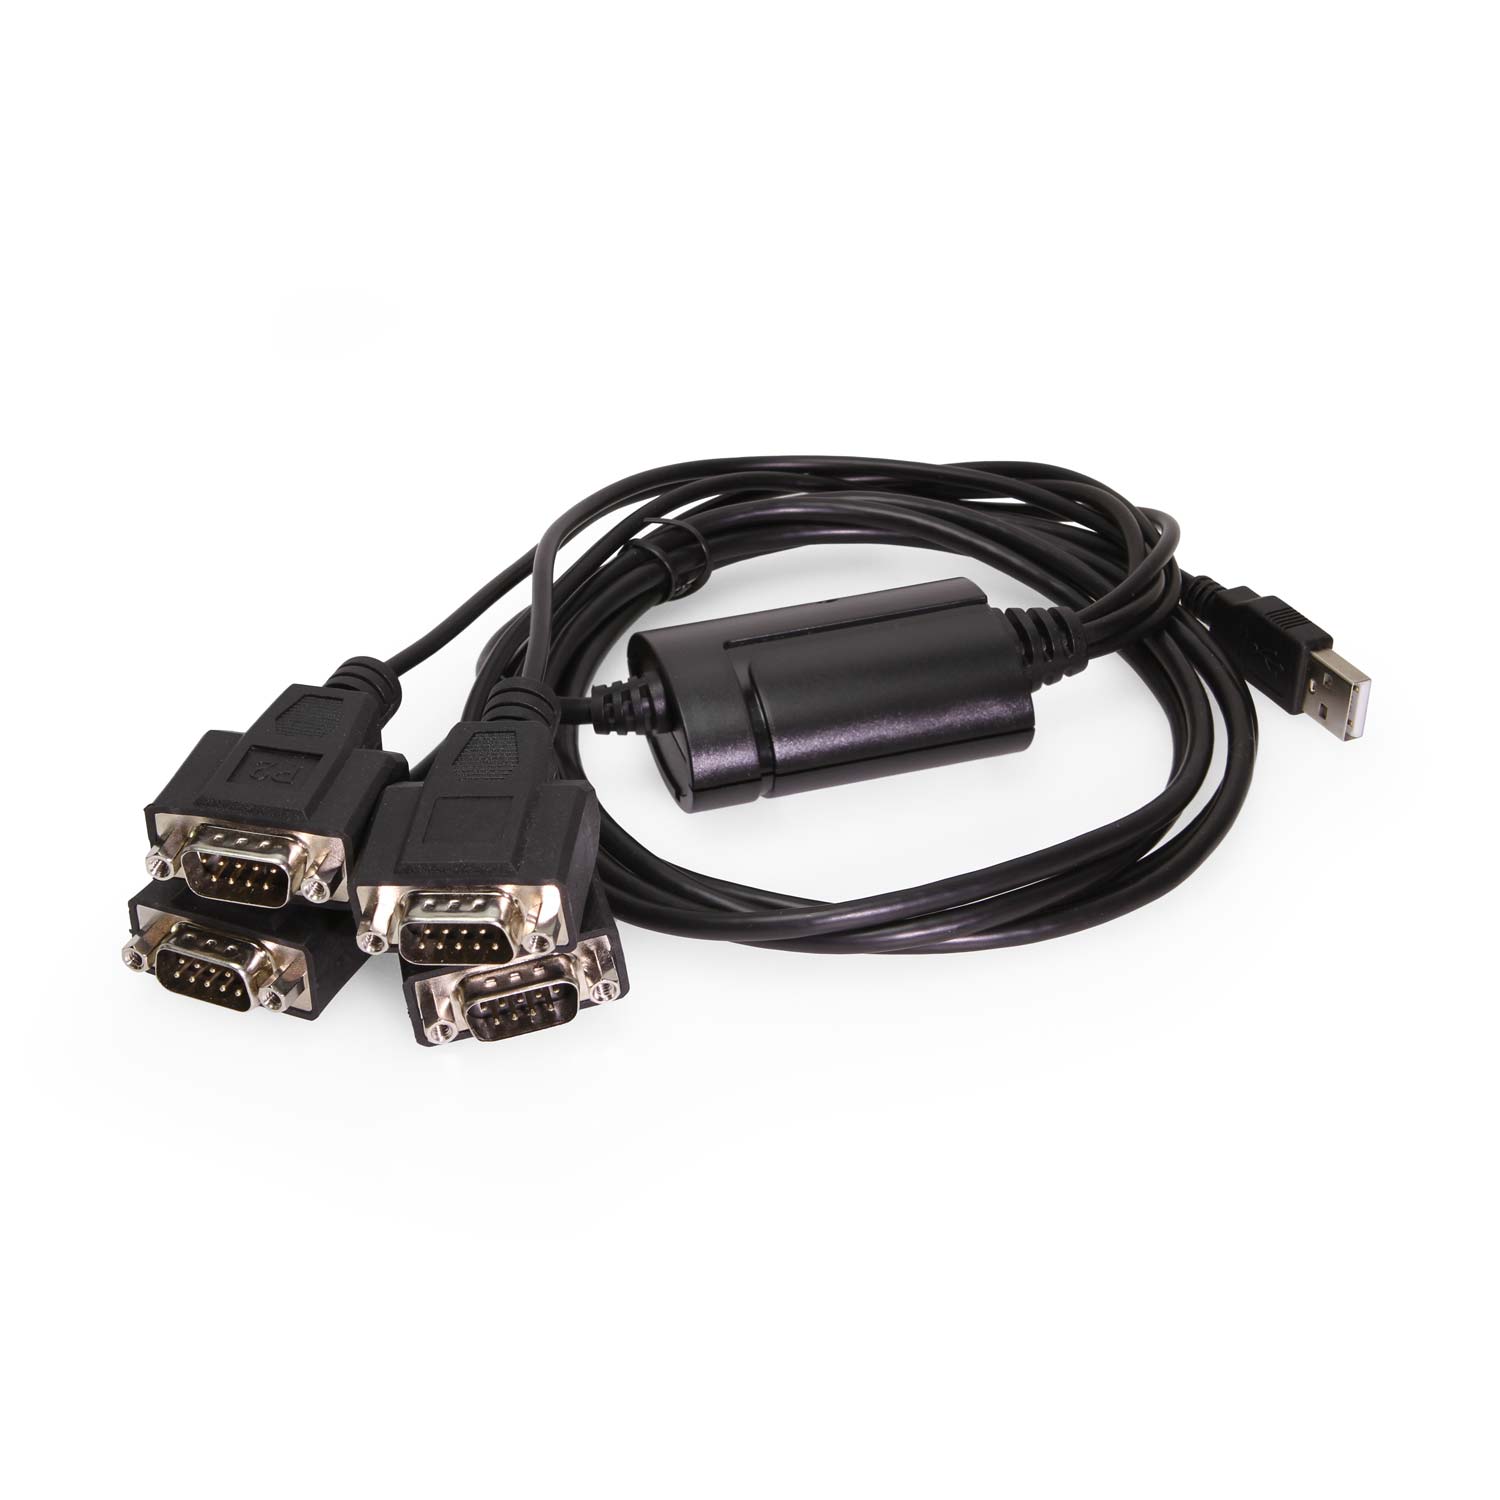 CoolGear 4 Port FTDI USB to DB-9 Serial Spider Cable